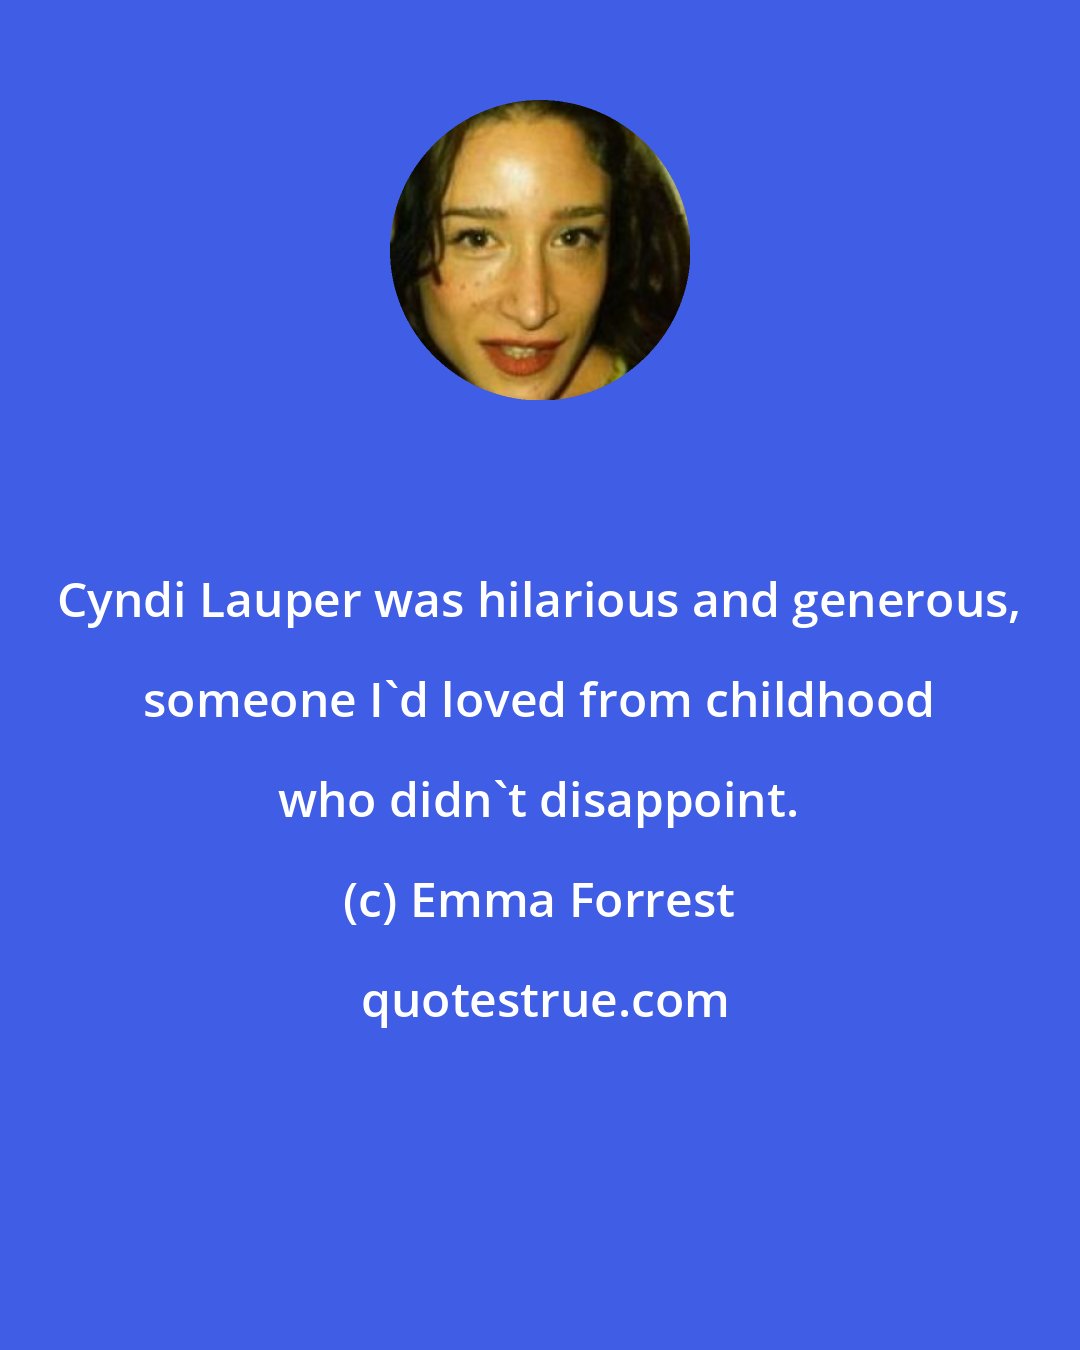 Emma Forrest: Cyndi Lauper was hilarious and generous, someone I'd loved from childhood who didn't disappoint.